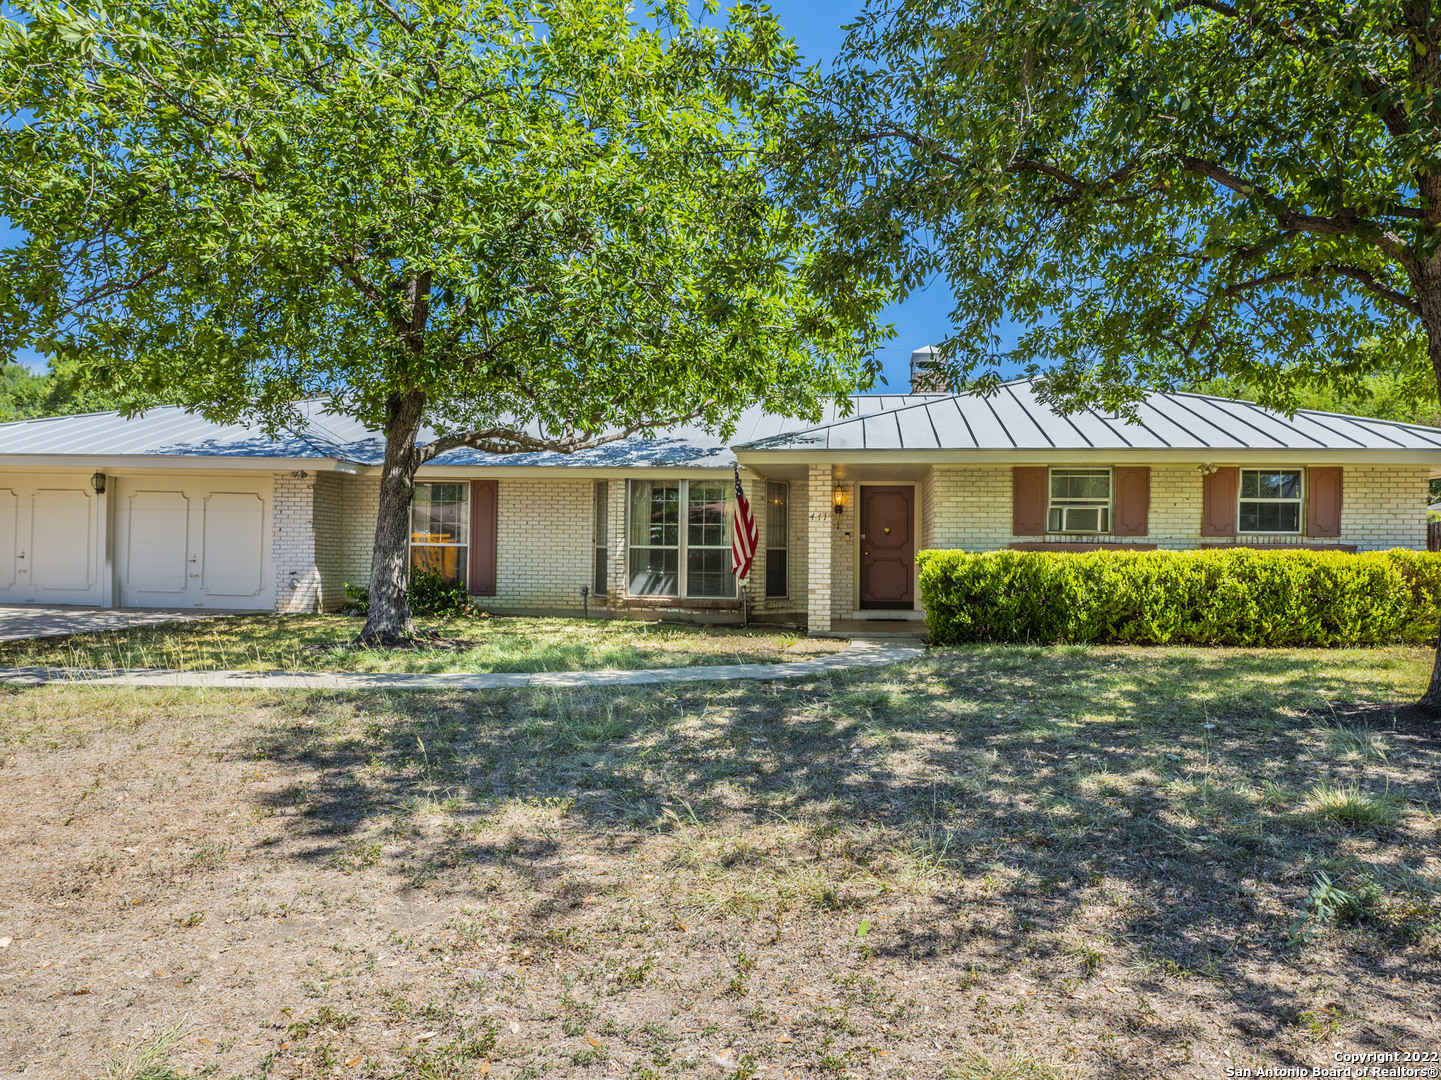 Great opportunity to own a vintage 1960's home in friendly Windcrest!  With some TLC, this home will be fabulous.  Fixer upper!!! Home to be sold AS IS and is priced accordingly!!! Seeking the perfect buyer with a vision and imagination ready to update.  Located minutes to the Golf Course and walking distance to the elementary school, minutes to IH35, 1604, 410, Randolph AFB.  Single story ranch with 3 bedrooms, 2 bathrooms, 2 living areas, formal dining, large family room with built ins and a fireplace.  Nice flat yard with plenty of room for playing ball or soccer.  There is even a dog run for FIDO.  Don't forget, Windcrest is known for holiday decorating.  Join the fun and decorate this home with Holiday Lights!!!!